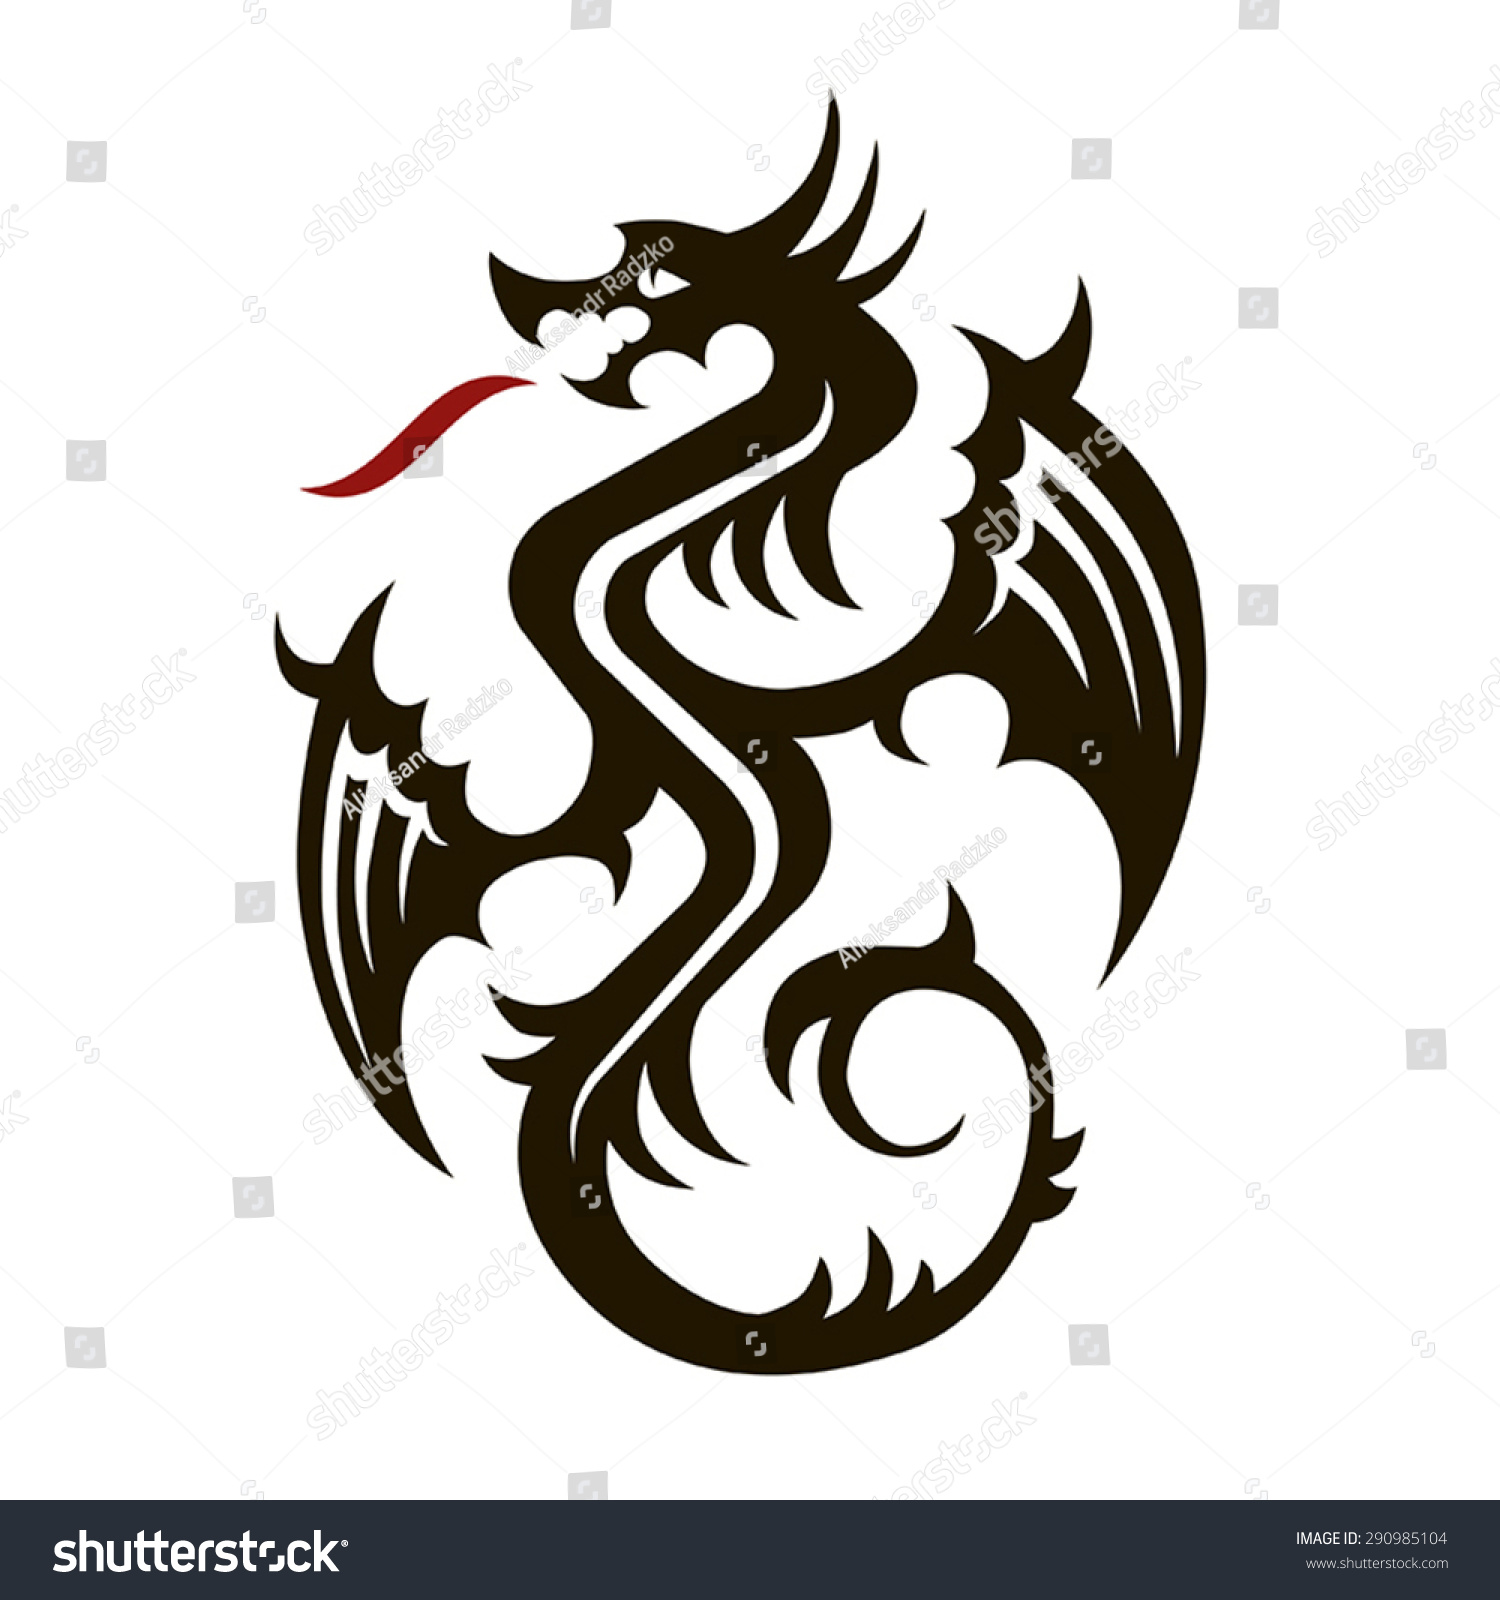 Vector Black Dragon With Wings And Red Flames On A White Background